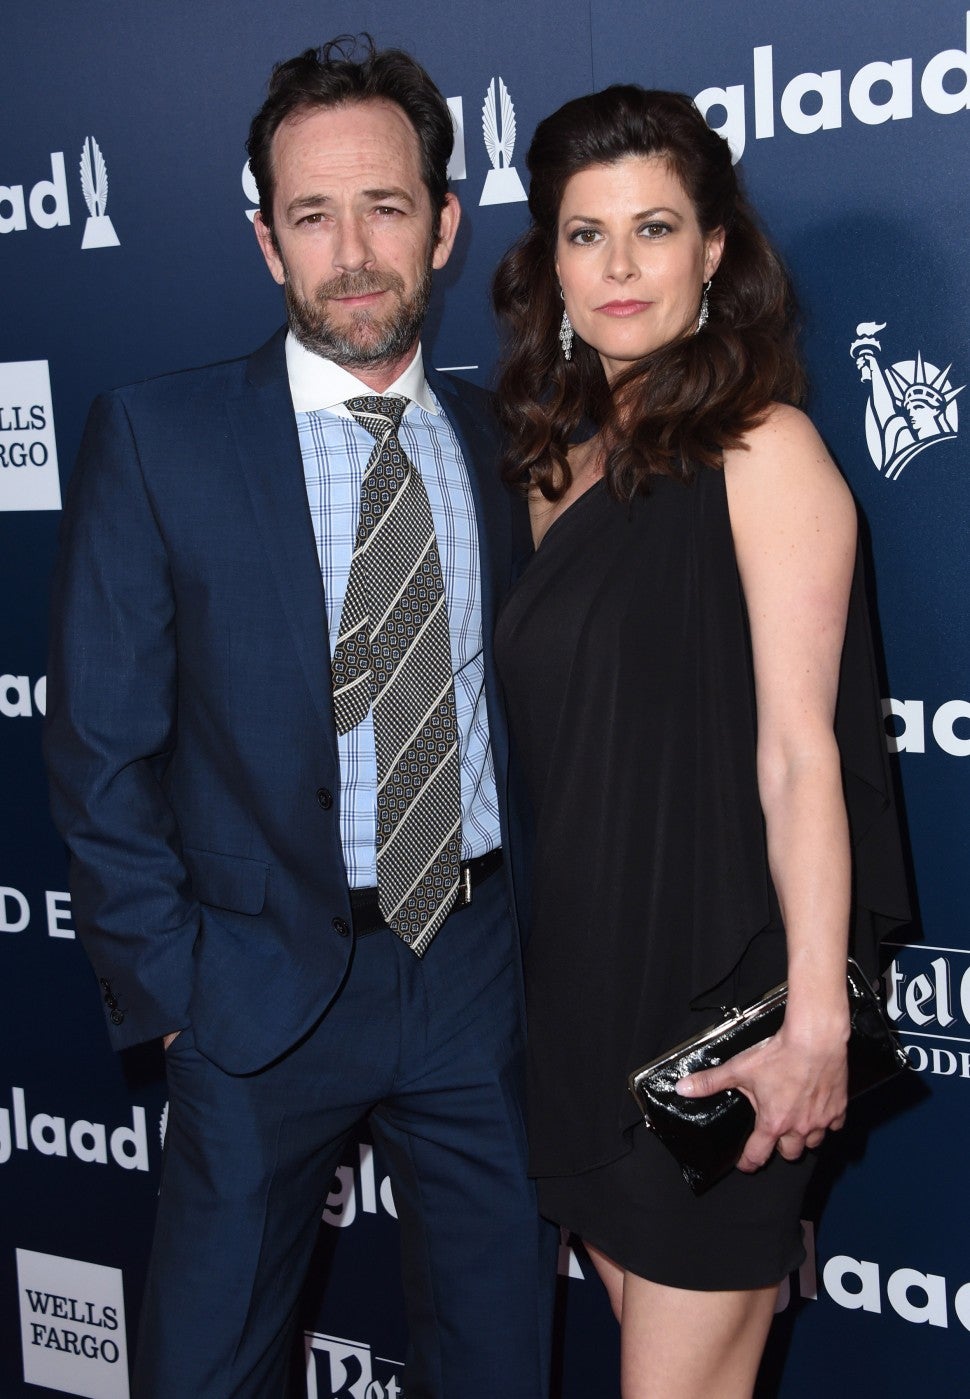 Luke Perry and girlfriend attend the 28th annual GLAAD Media awards at the Beverly Hilton hotel in Beverly Hills, California, April 1, 2017.